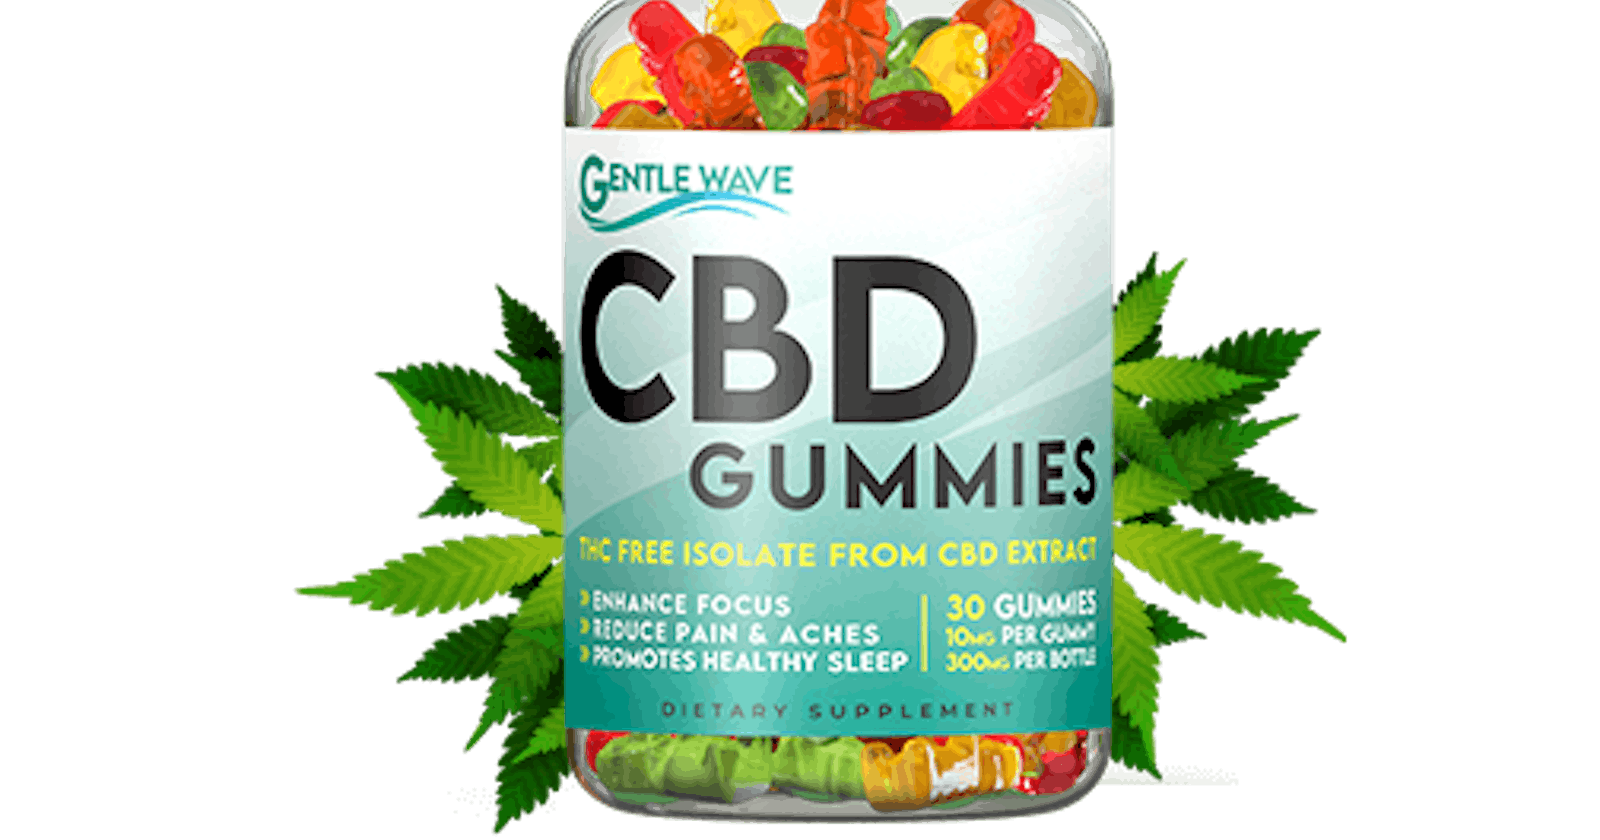 Gentlewave Cbd Gummies On A Budget: 8 Tips From The Great Depression